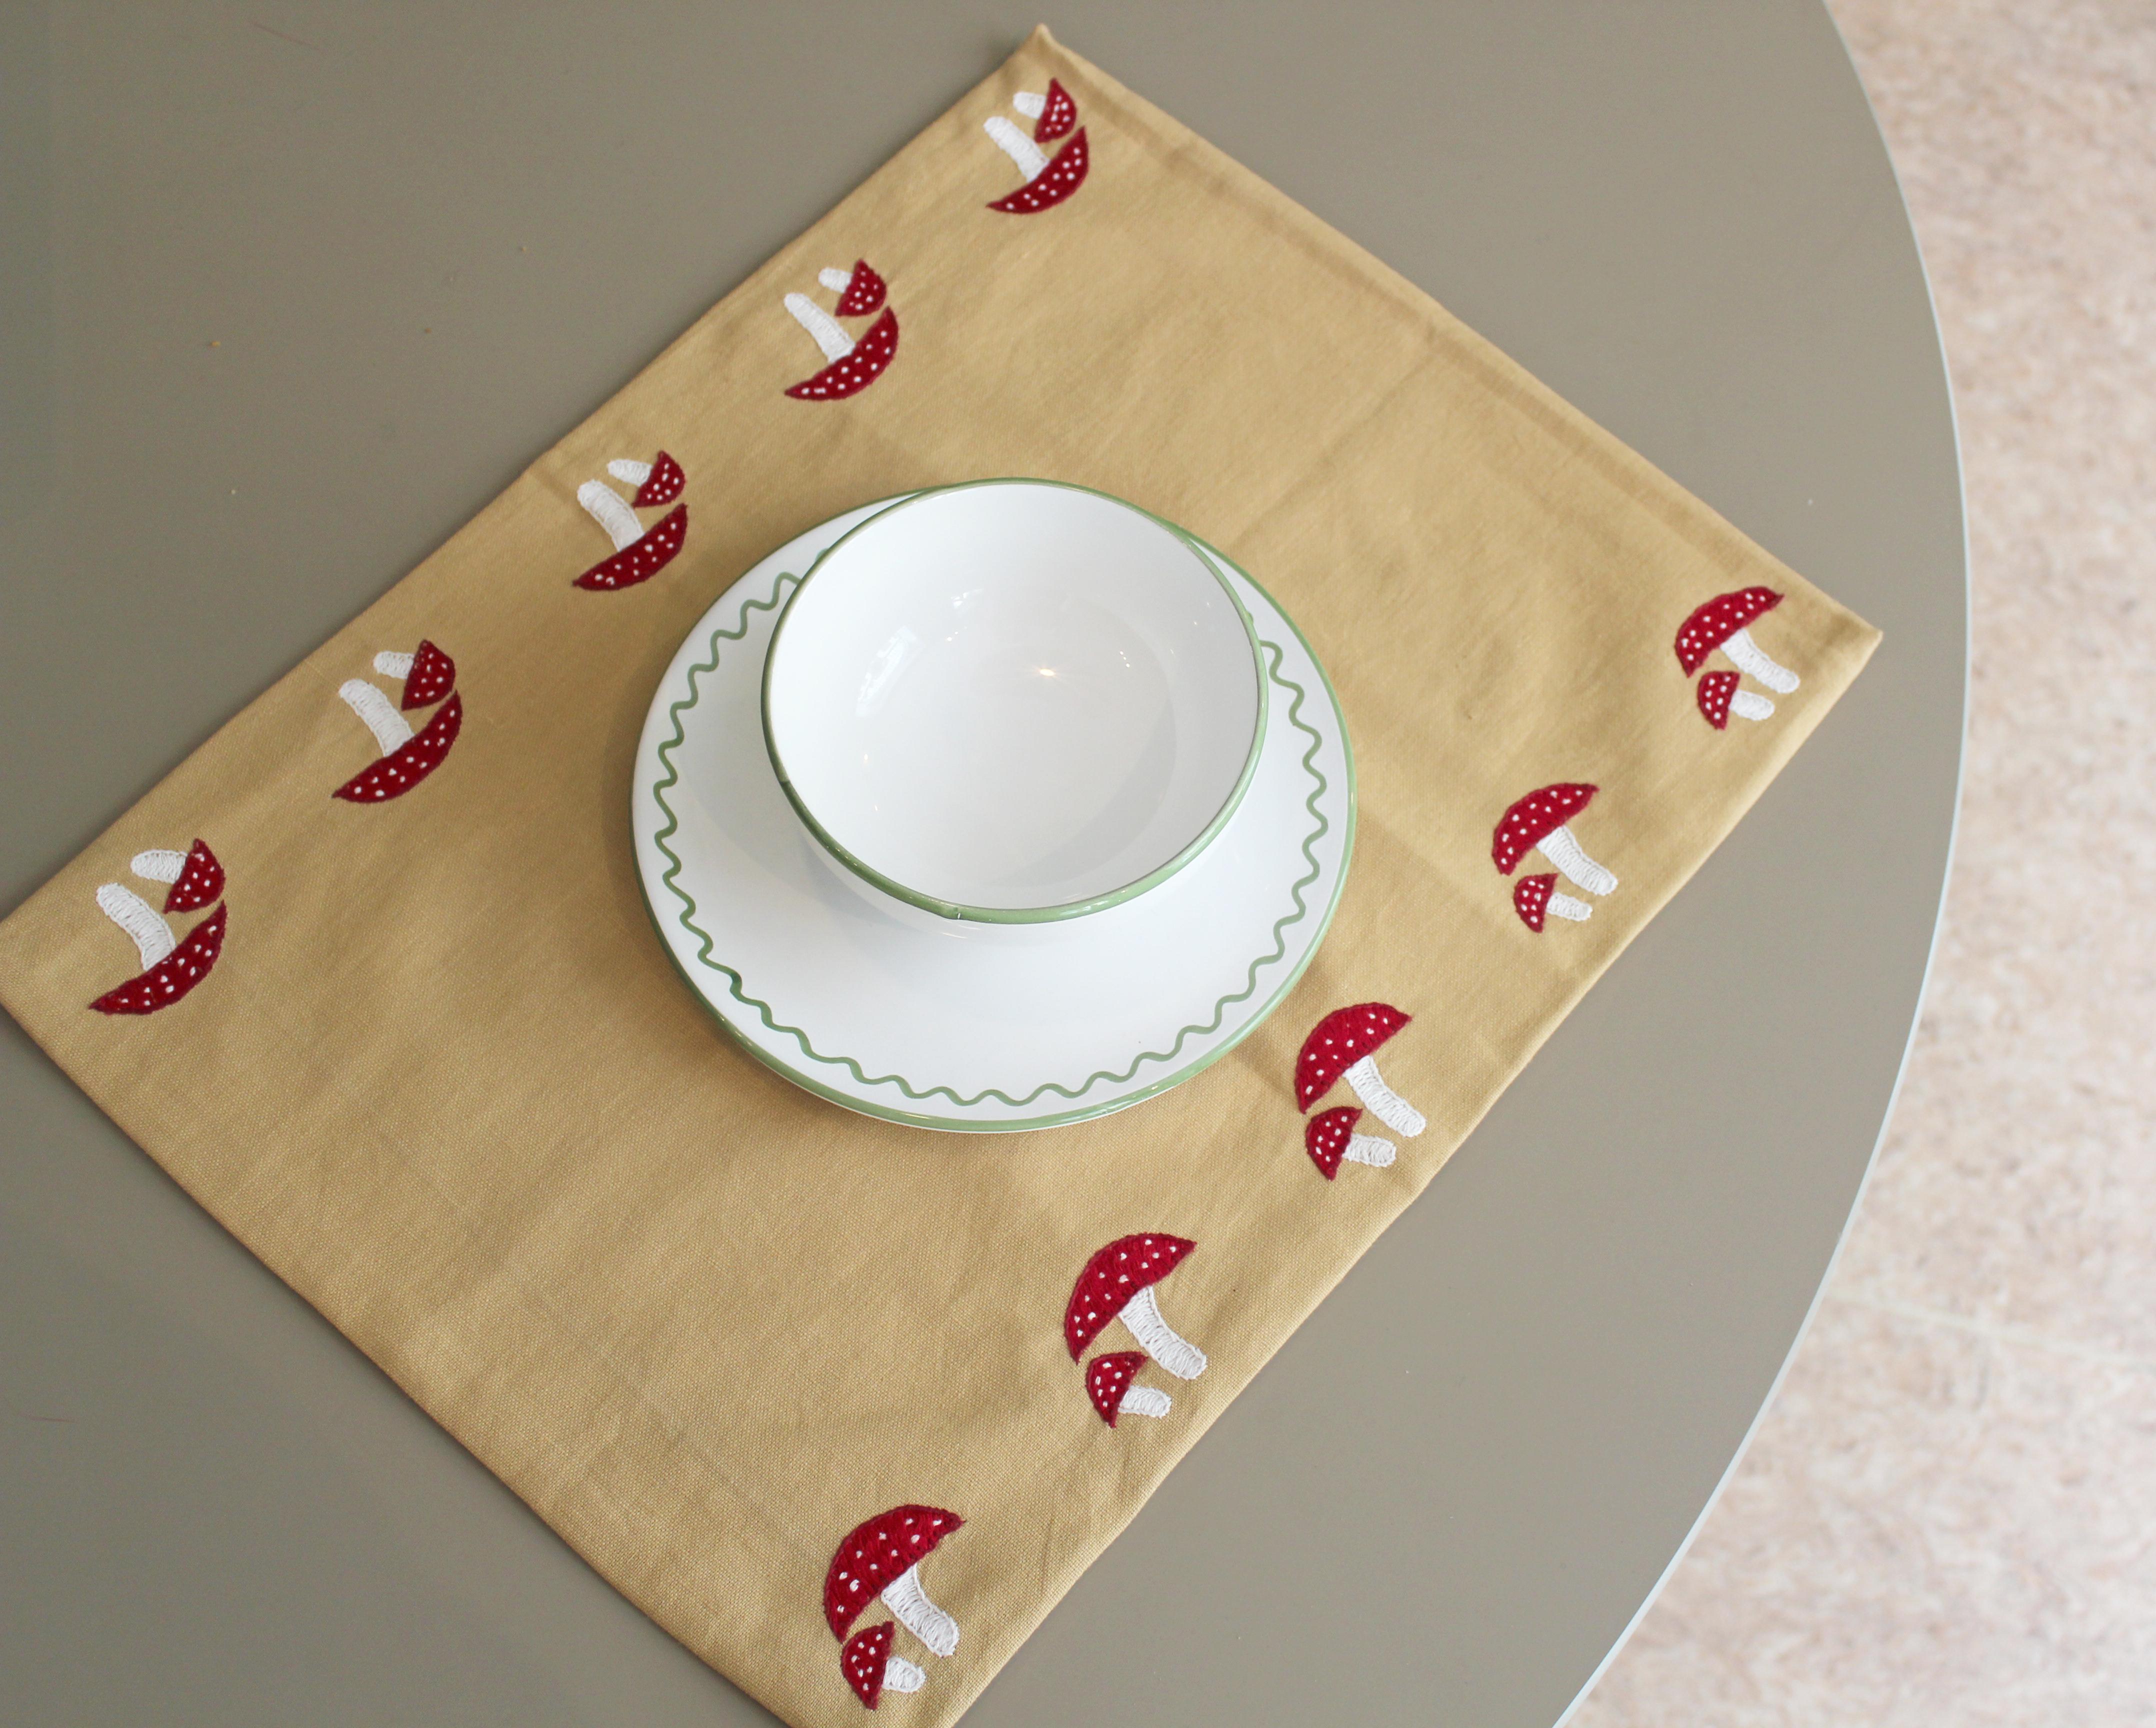 Jore Copenhagens placemats with hand embroidery adds a bit of humor to every meal. We are in love with the little mushroom, and it is the perfect way of adding a bit of danger ( wink wink - it's poisonous) to the daily dinner party.

Care: 
We do